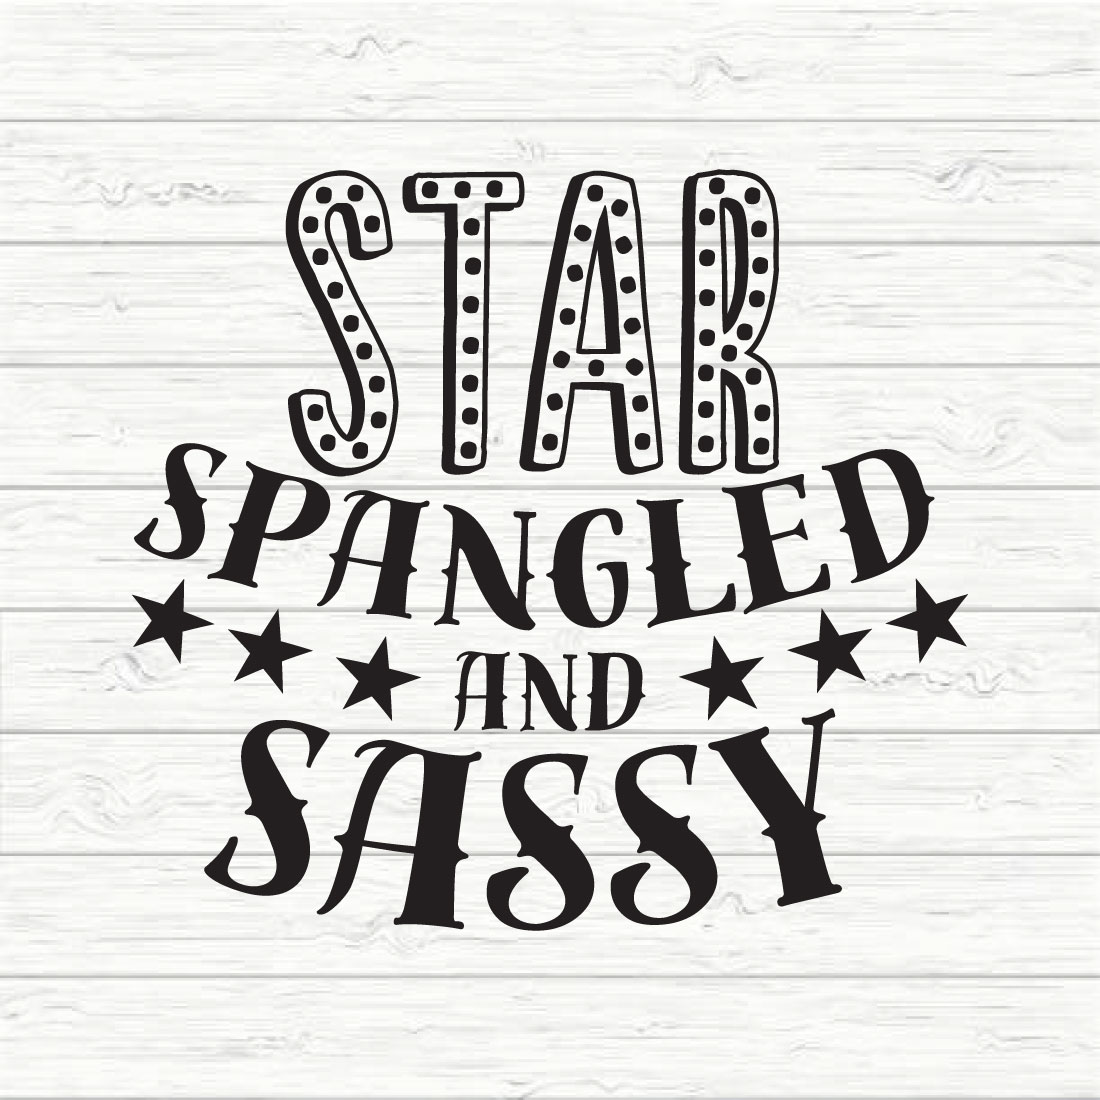 Star Spangled and Sassy cover image.